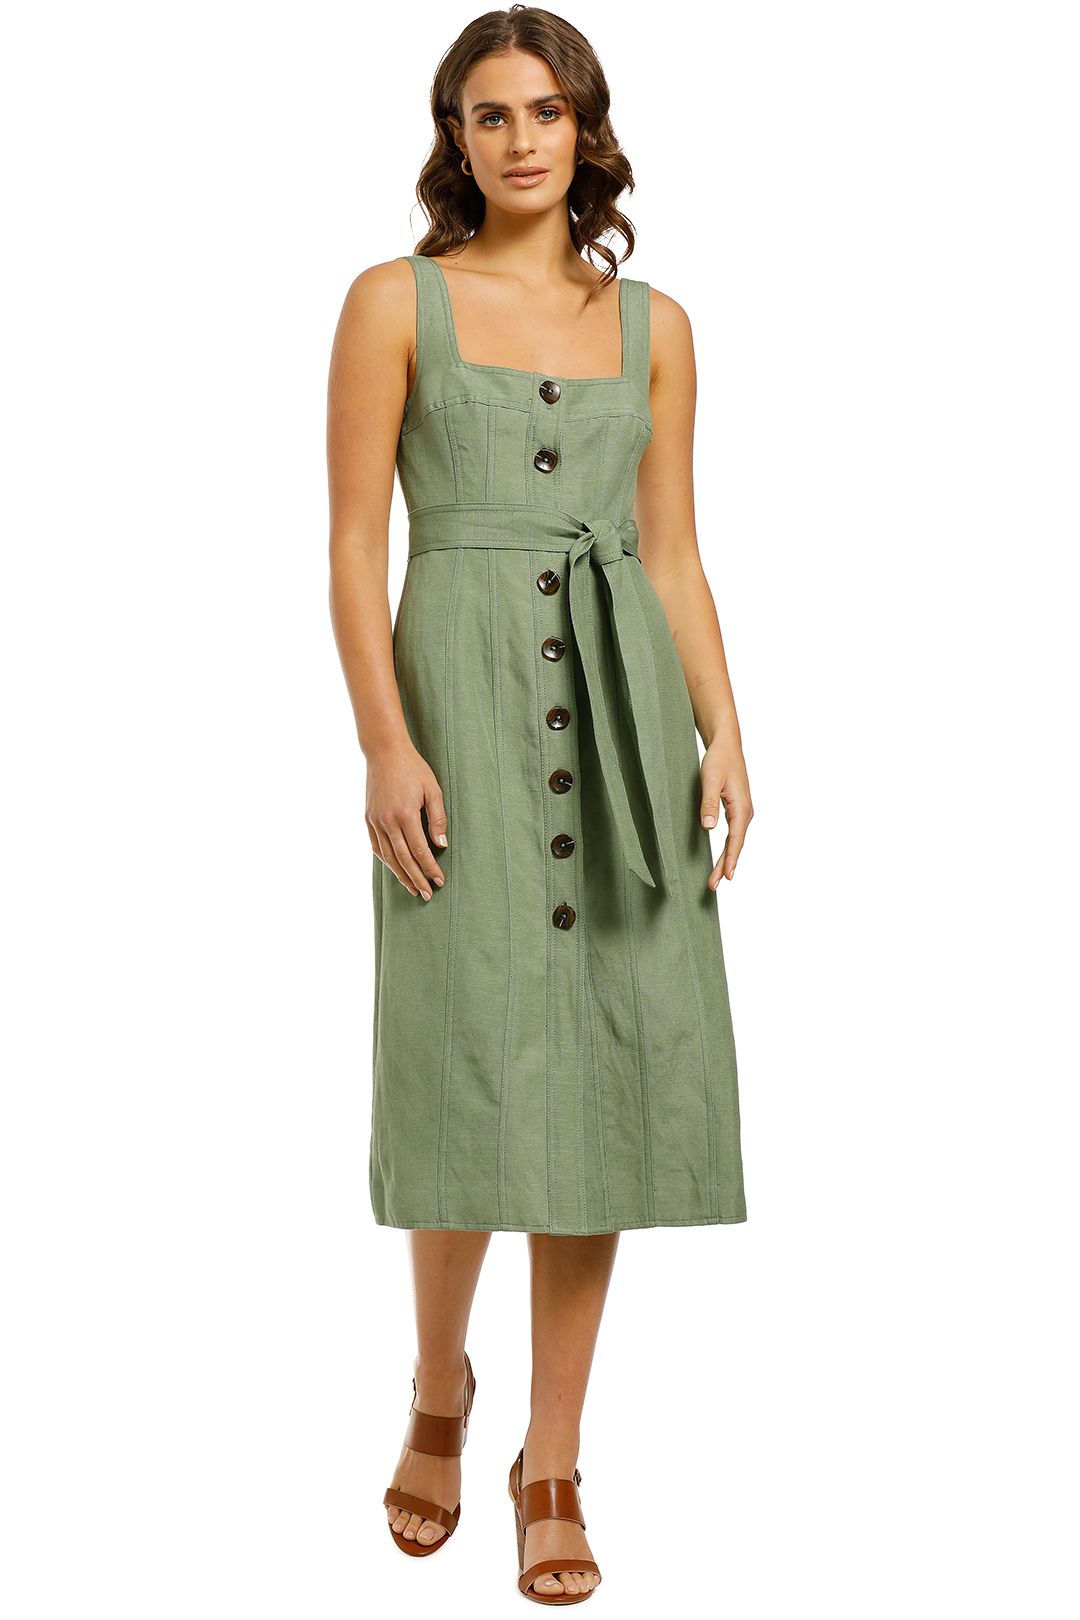 CMEO-Collective-Occurence-Dress-Ivy-Front